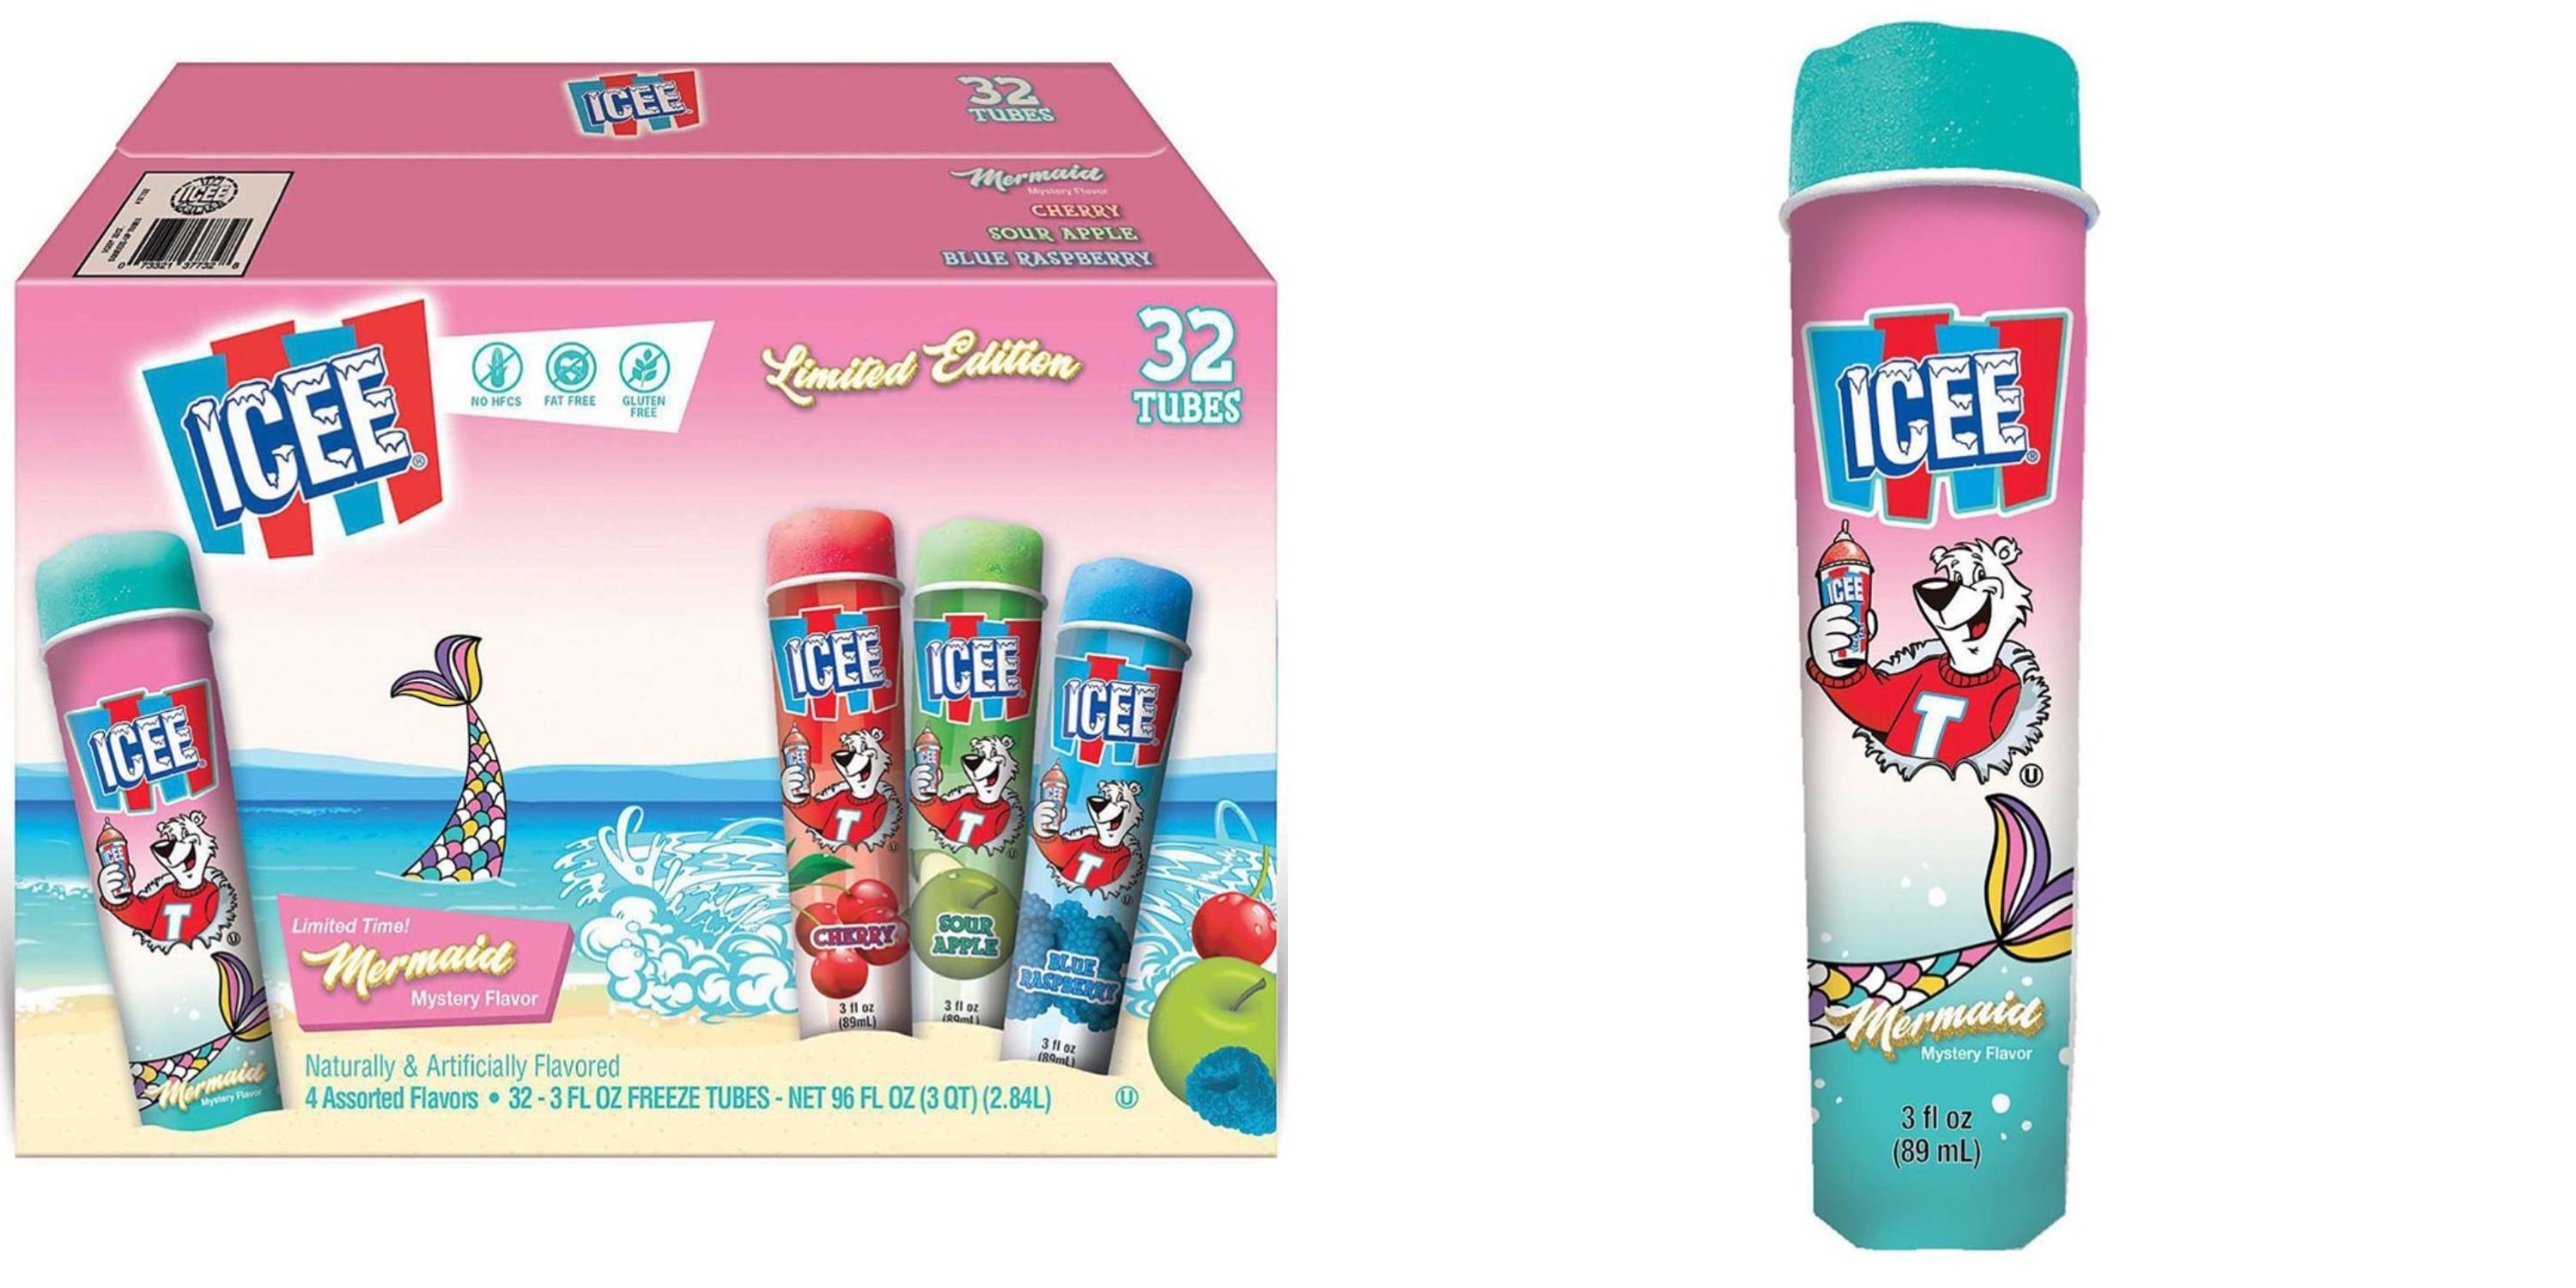 ICEE Released A Mermaid Mystery-Flavored Ice Pop